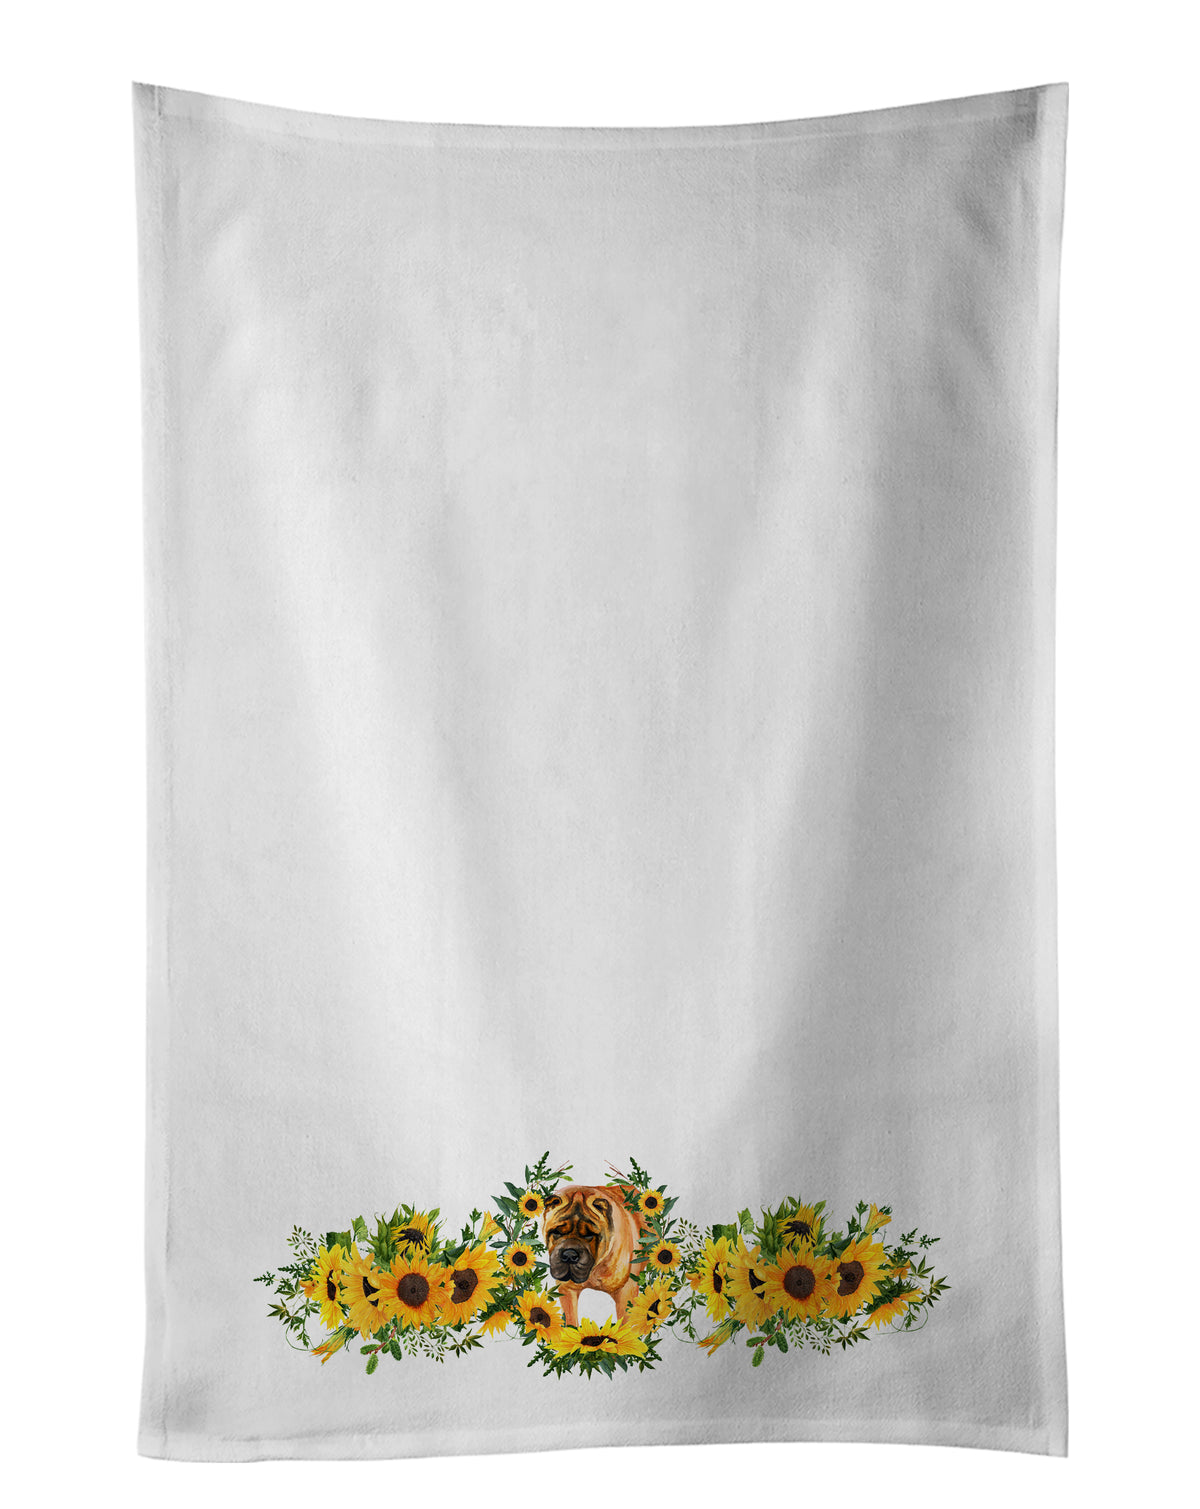 Buy this Shar Pei in Sunflowers White Kitchen Towel Set of 2